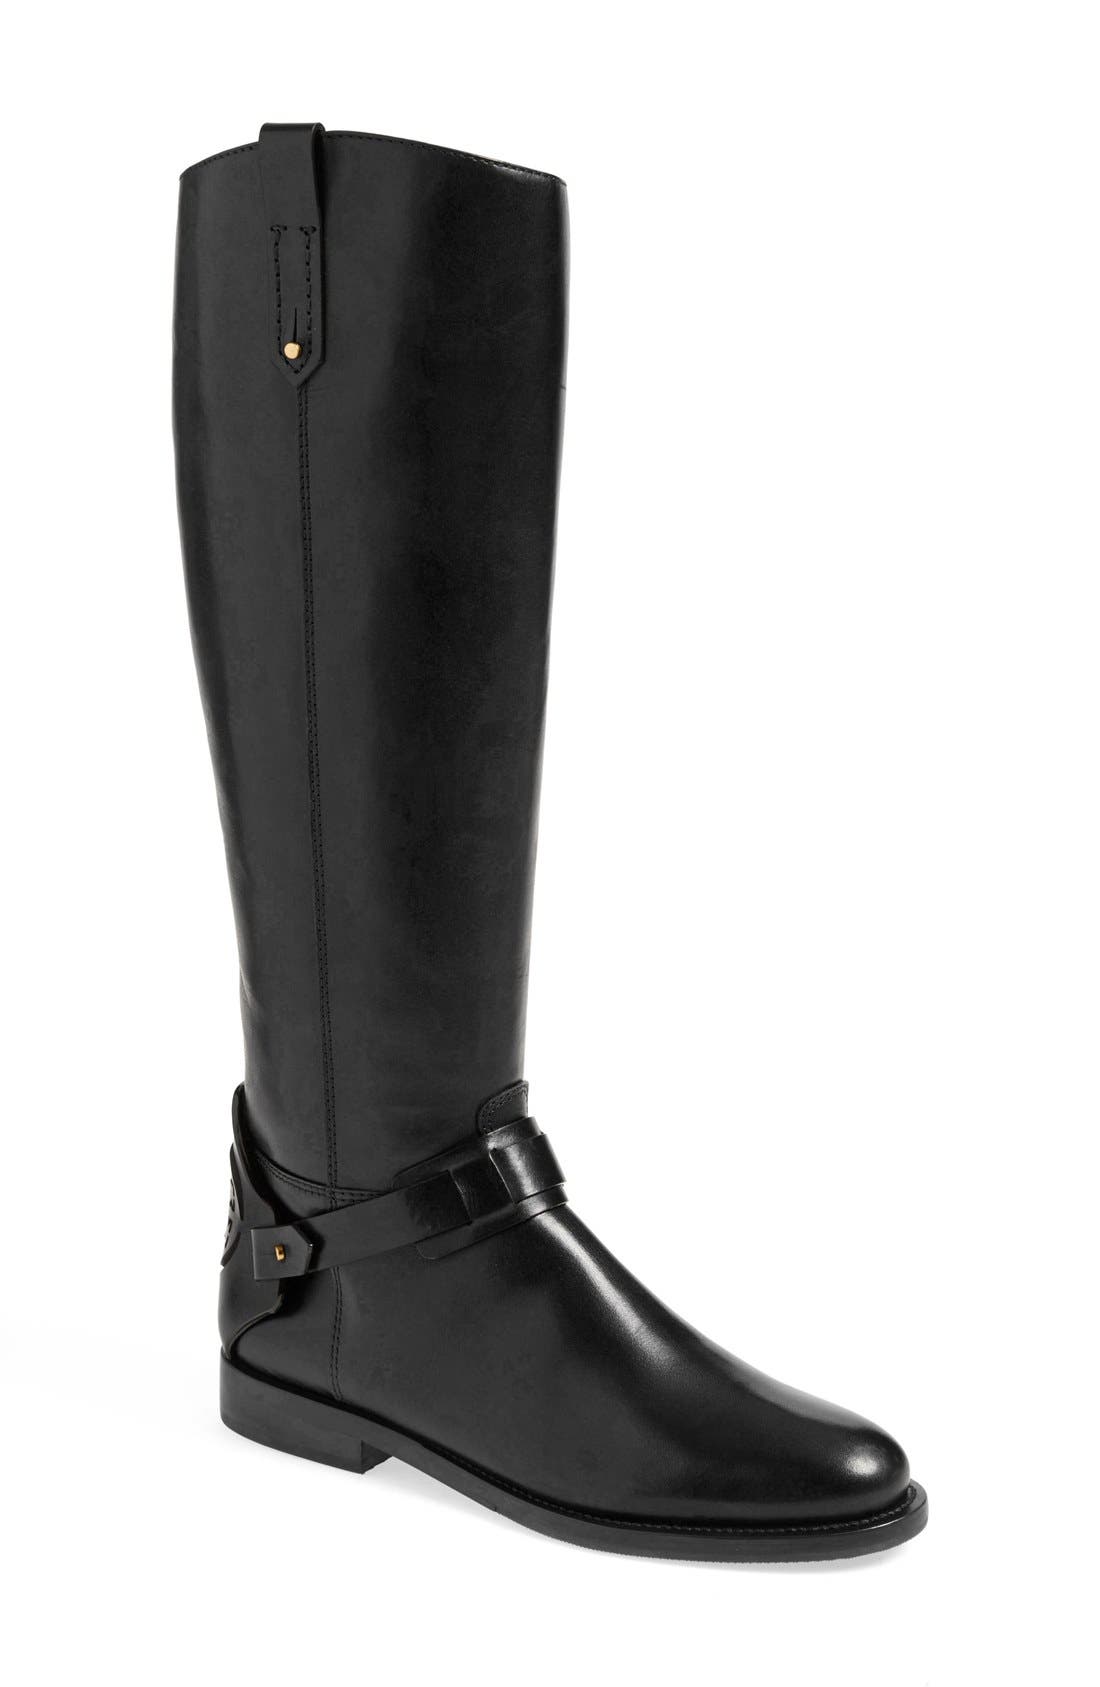 tory burch boots sale nordstrom